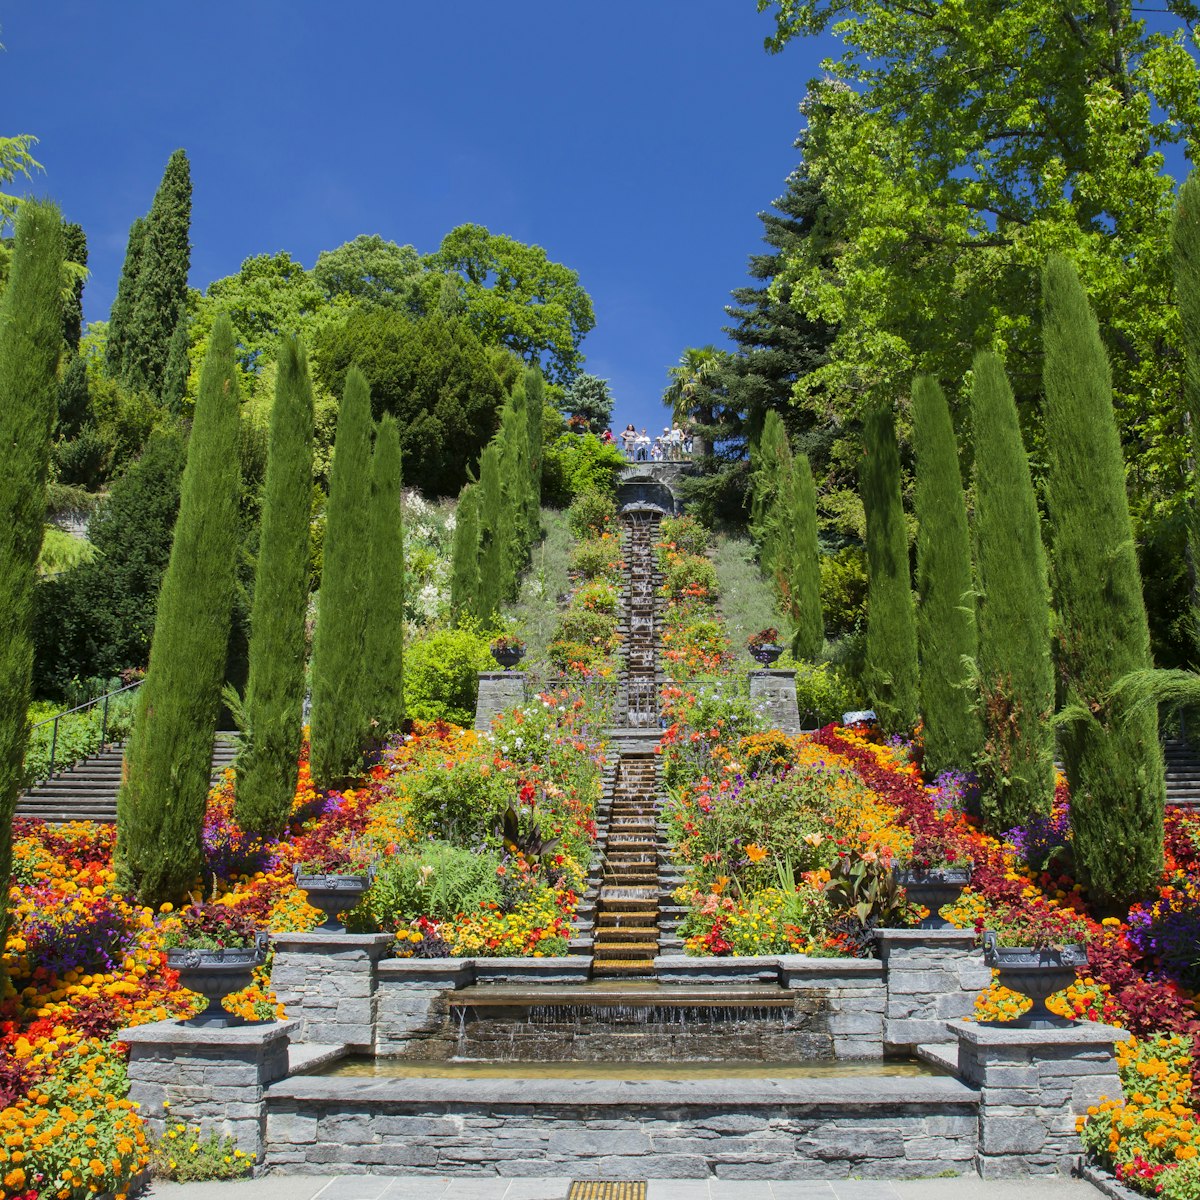 Italy Flower stairs and bed of flowers, Mainau Island, Baden-WÃ¼rttemberg, Germany, Europe
Italy Flower stairs and bed of flowers, Mainau Island, Baden-Württemberg, Germany, Europe
1496841157
baden-wurttemberg, central, constance, detail, federal, flowerstairs, german, liliaceae, mainau, middle, republic, southern, stair, süddeutschland, tulipa, baden, bloom, bloomer, border, daylight, daytime, decorative, deserted, exterior, flowering, flowers, green, herbaceous, incidental, one, ornamental, park, pompous, public, spring, stairs, württhemberg